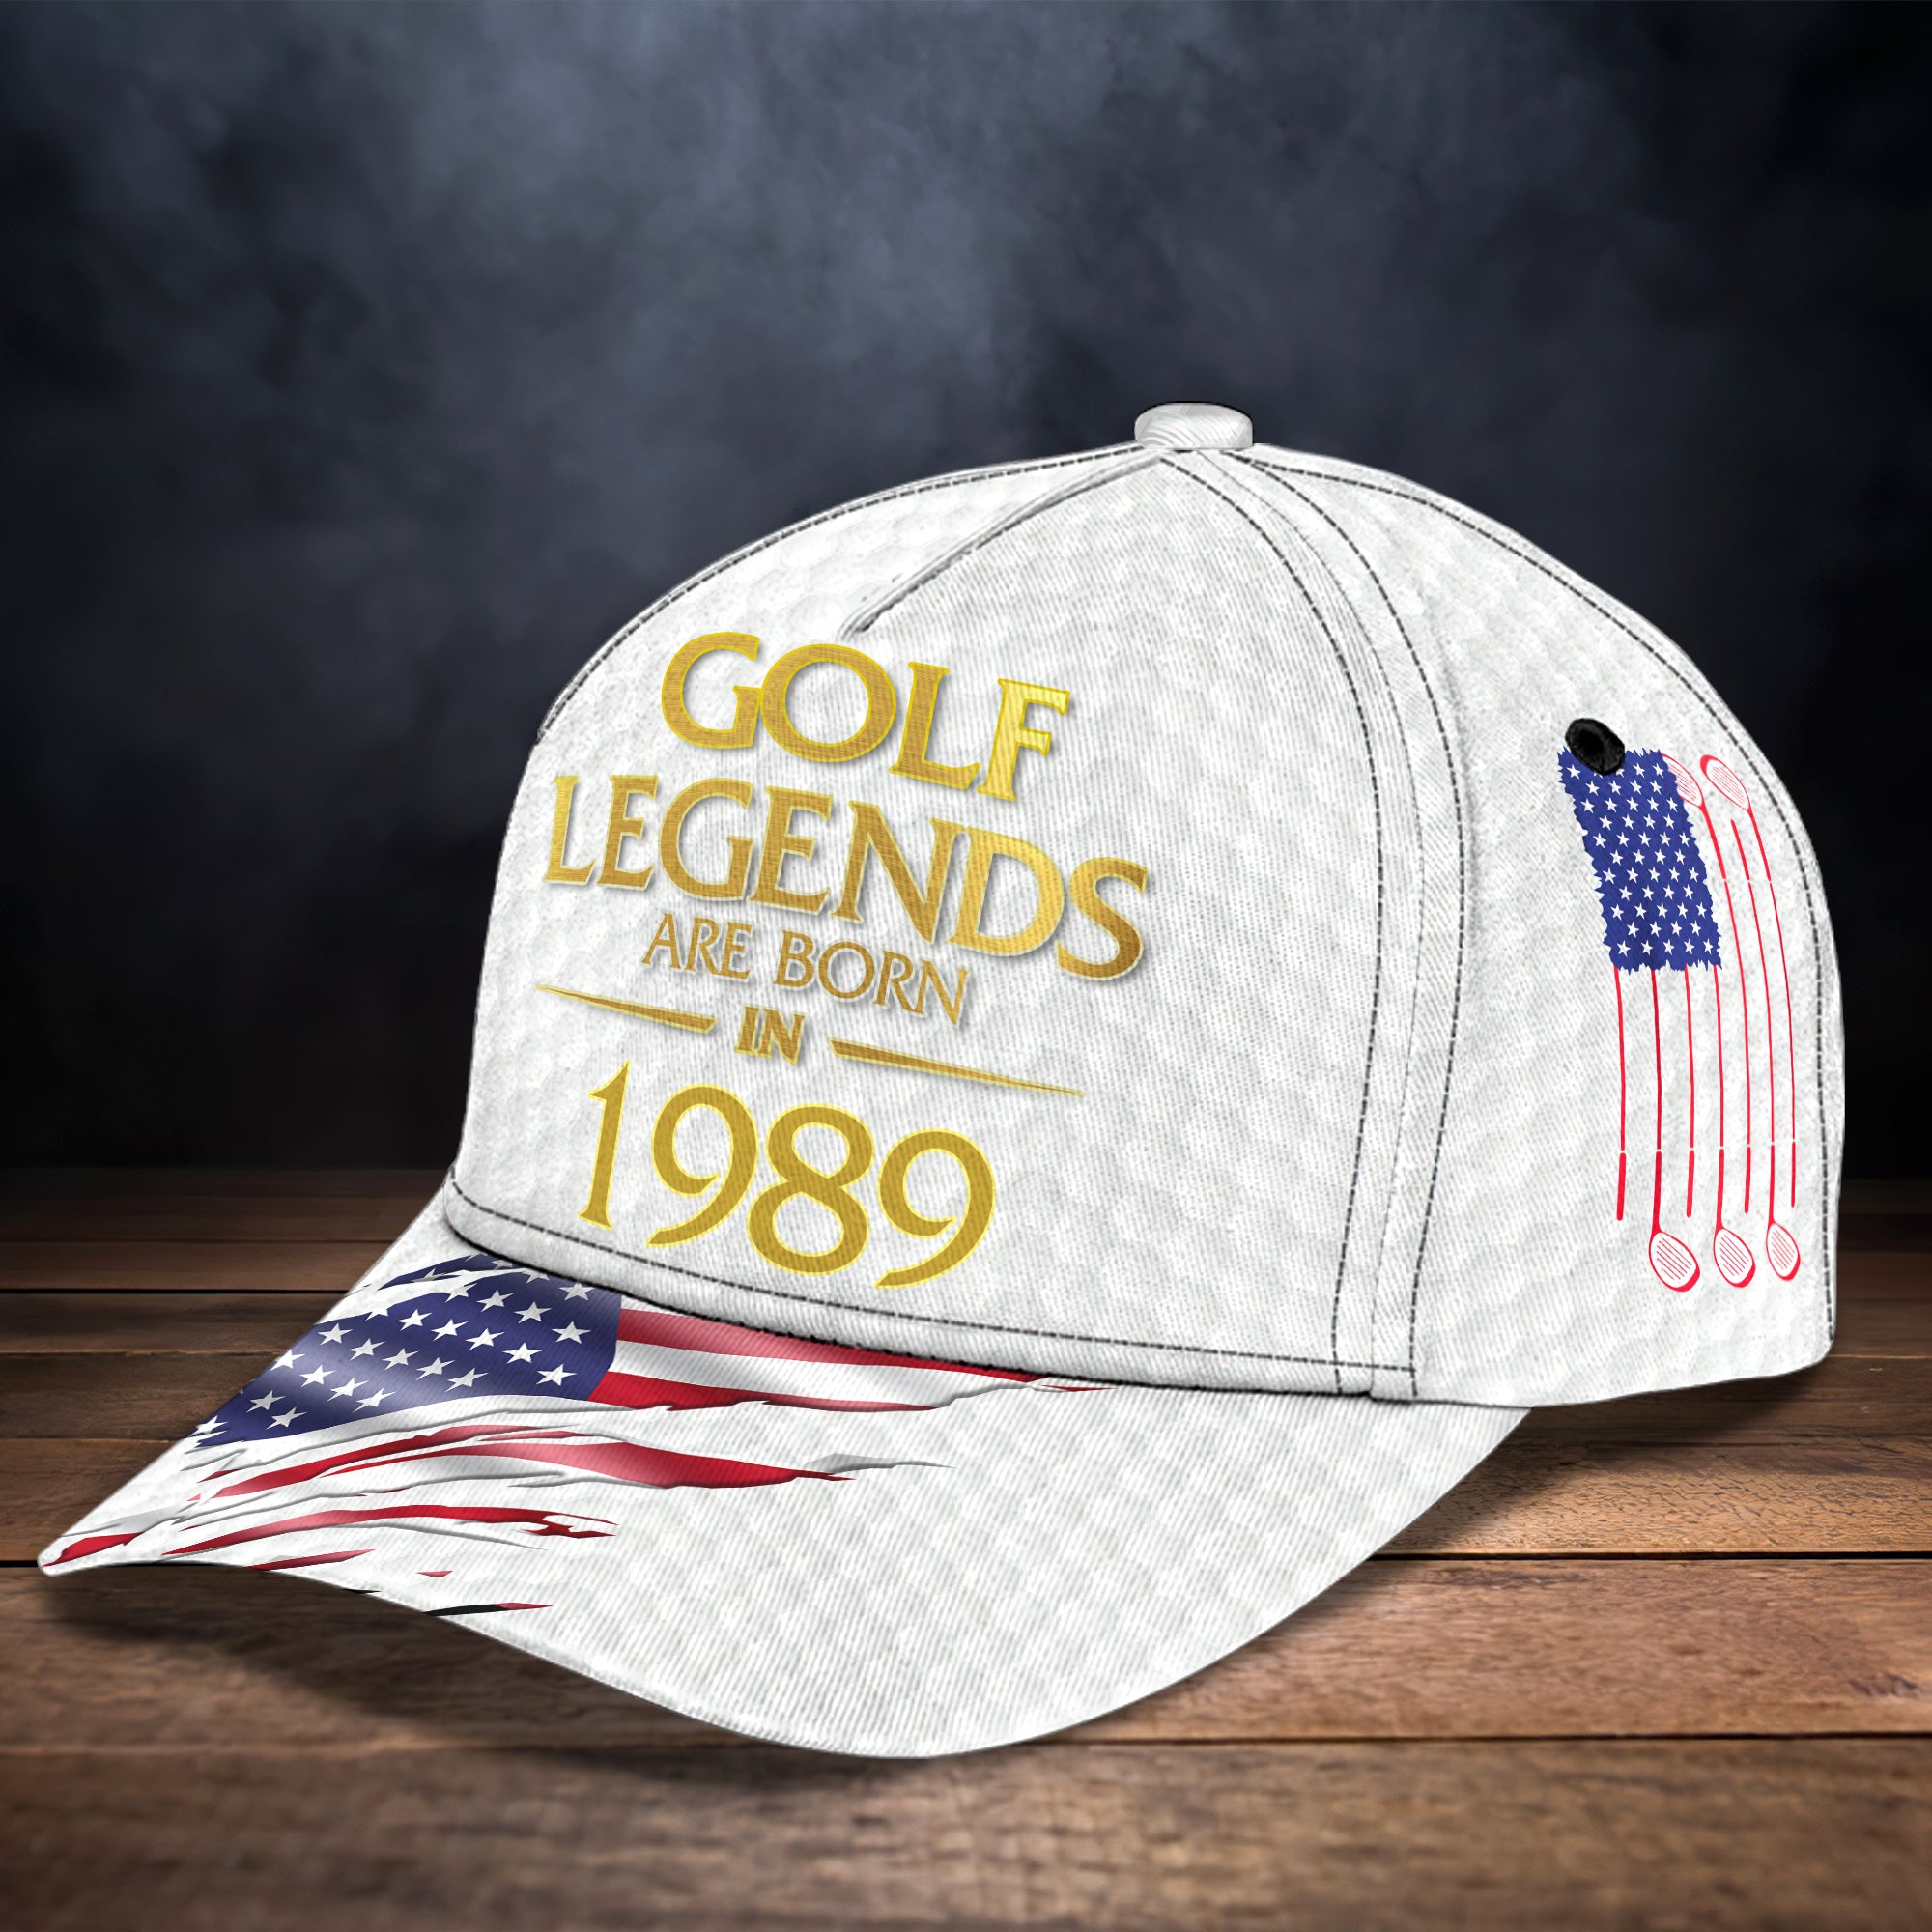 Golf Legend - Personalized Name Cap - Co98